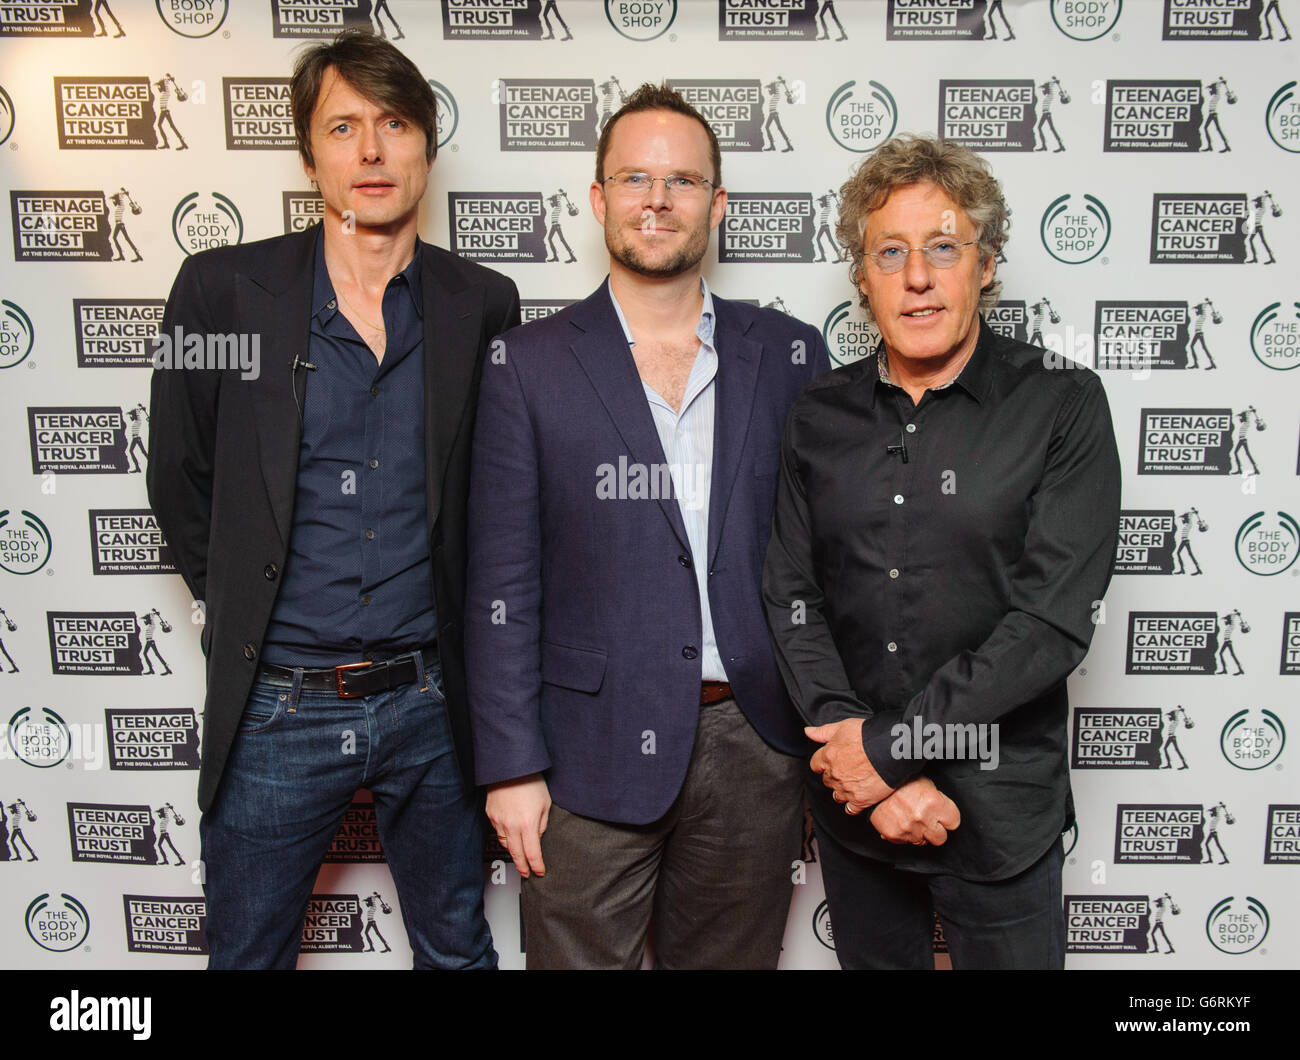 Director of Brand and Values at The Body Shop Sam Thomson (centre) with Brett Anderson of Suede (left), and Roger Daltry of The Who at a press conference at the Groucho Club, in Soho, central London, to announce the line up for the Teenage Cancer Trust concerts 2014. Stock Photo